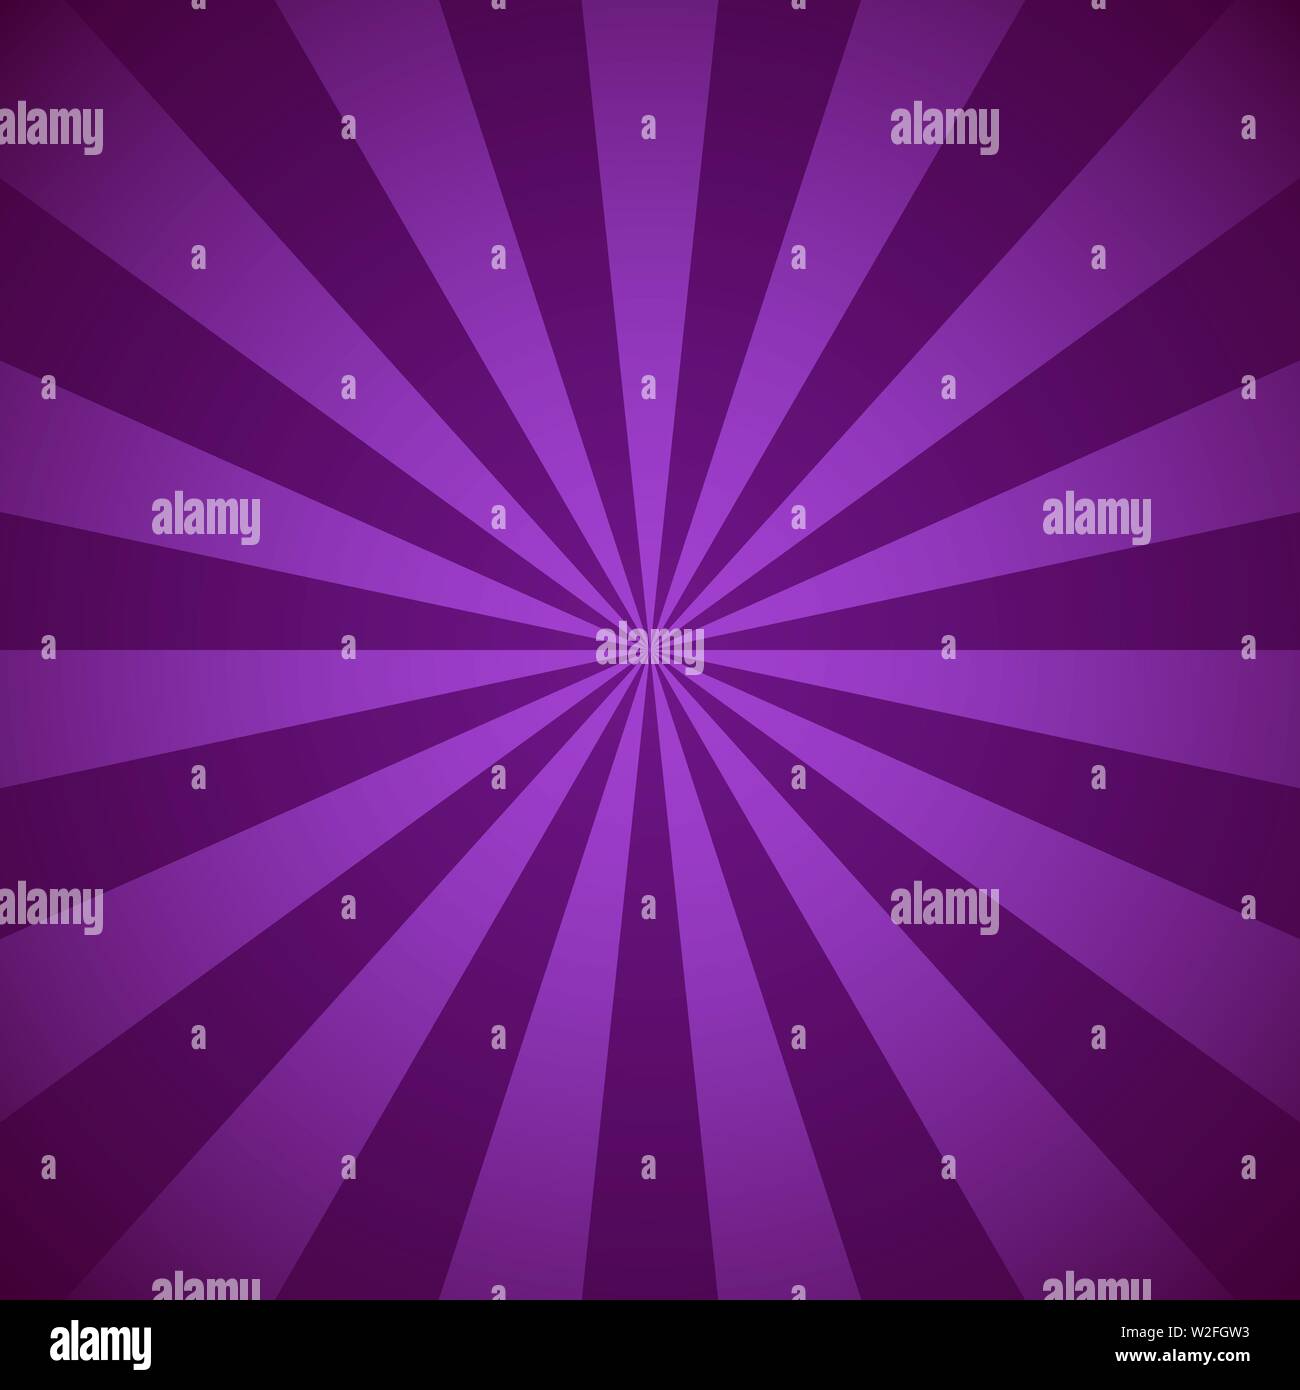 Violet beams and rays abstract vector illustration radial lines background Stock Vector